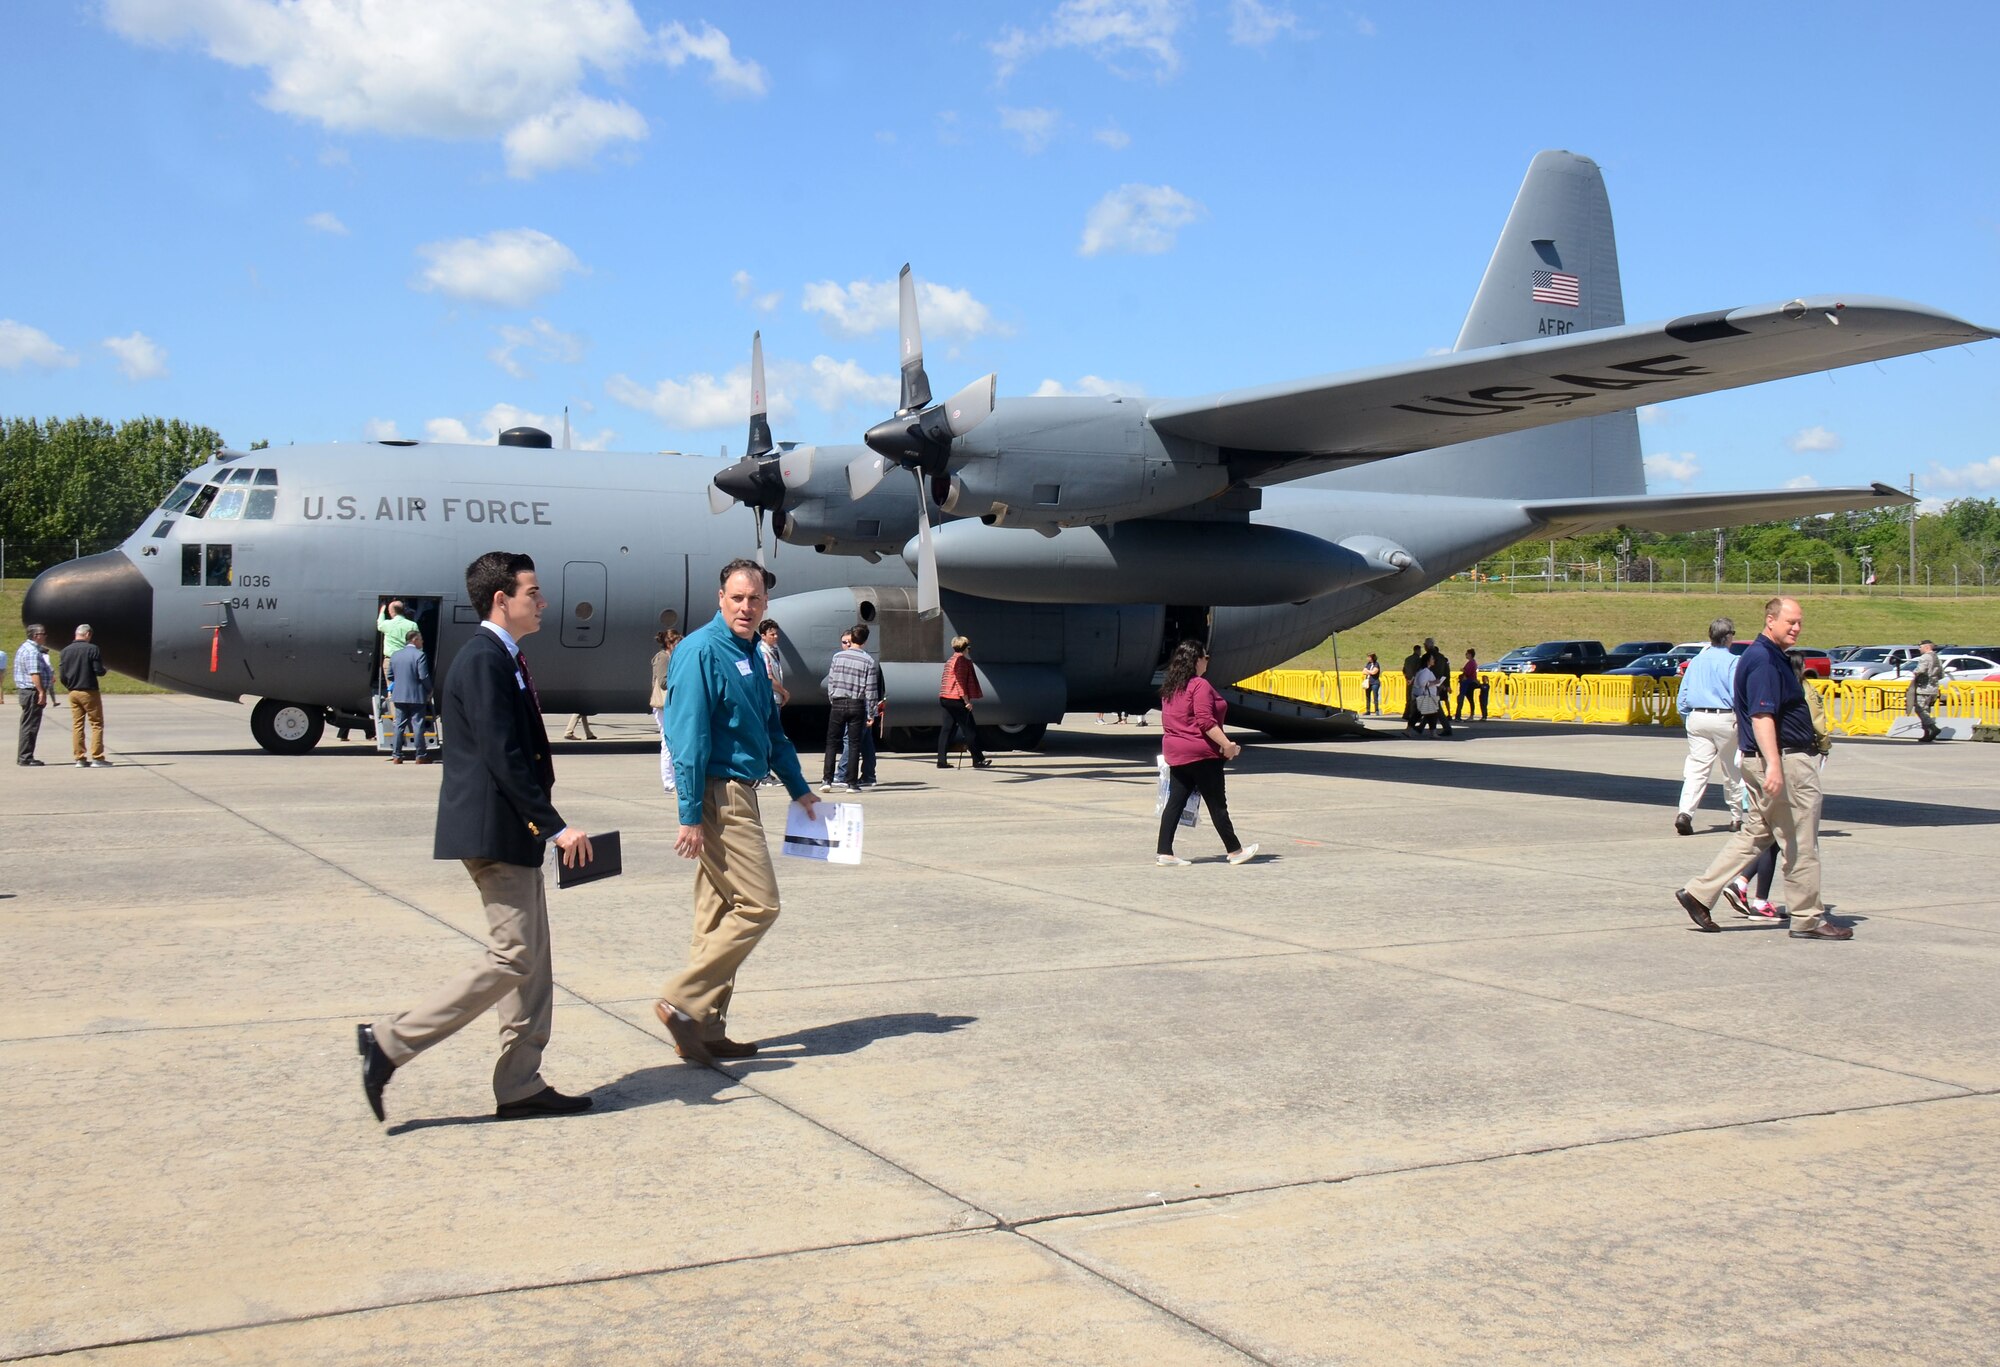 Families walk among static aircraft displays at this year's Academy Day, held at Dobbins Air Reserve Base, Ga. April 28, 2018. Aircraft displays were on hand in addition to guest speakers and academy representatives to give applicants firsthand experience with planes used in the various military branches. (U.S. Air Force photo/Don Peek)